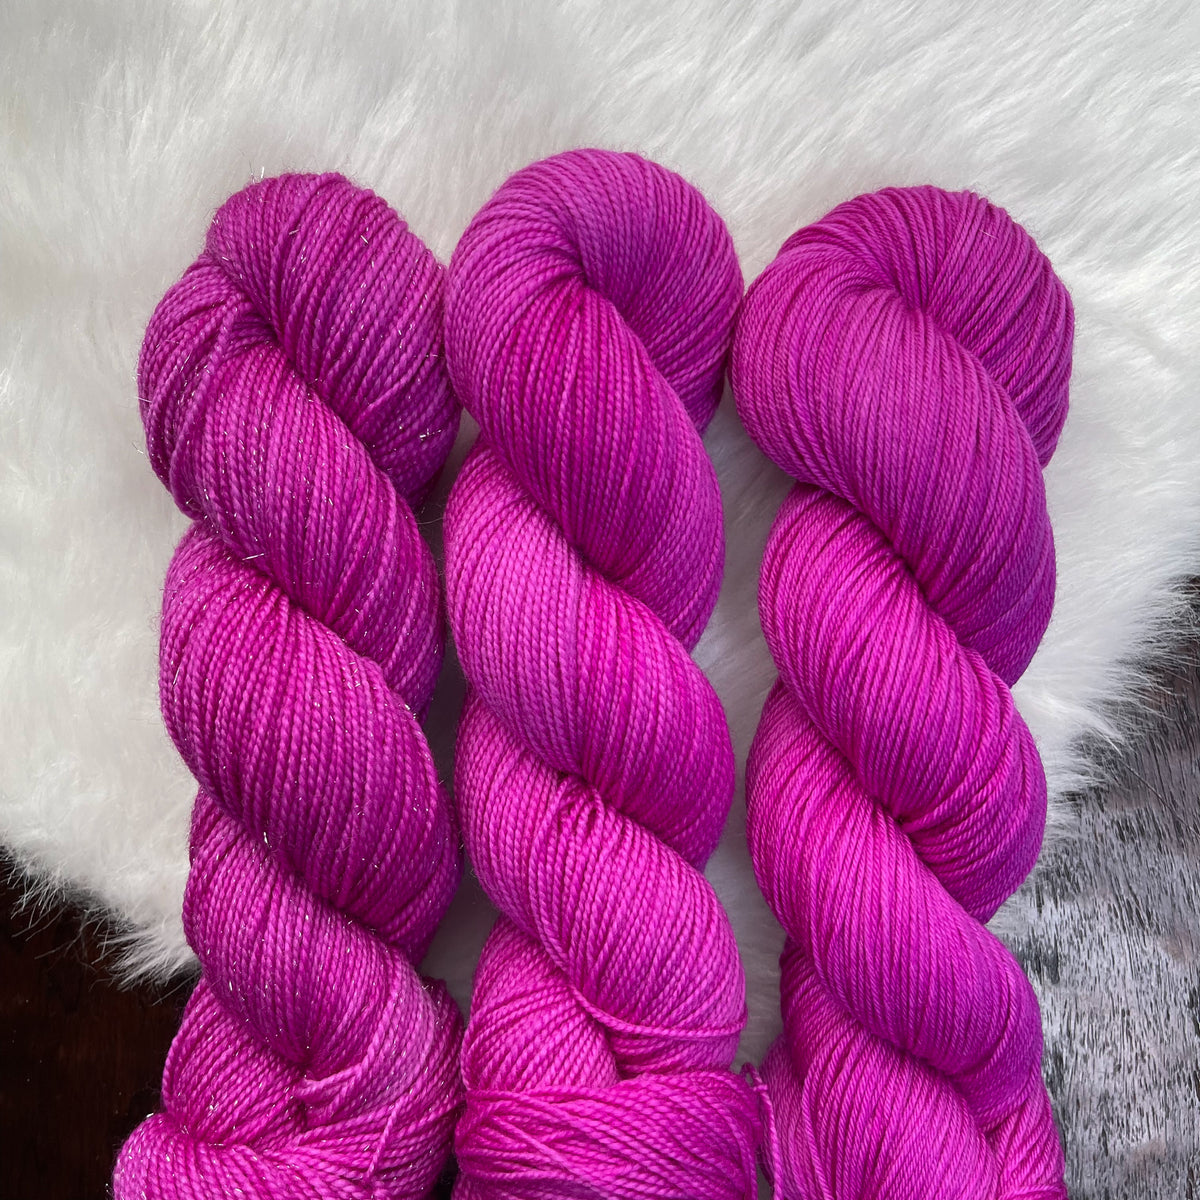 STAR CROSSED LOVERS  - Dyed to Order - Hand Dyed Yarn Skein